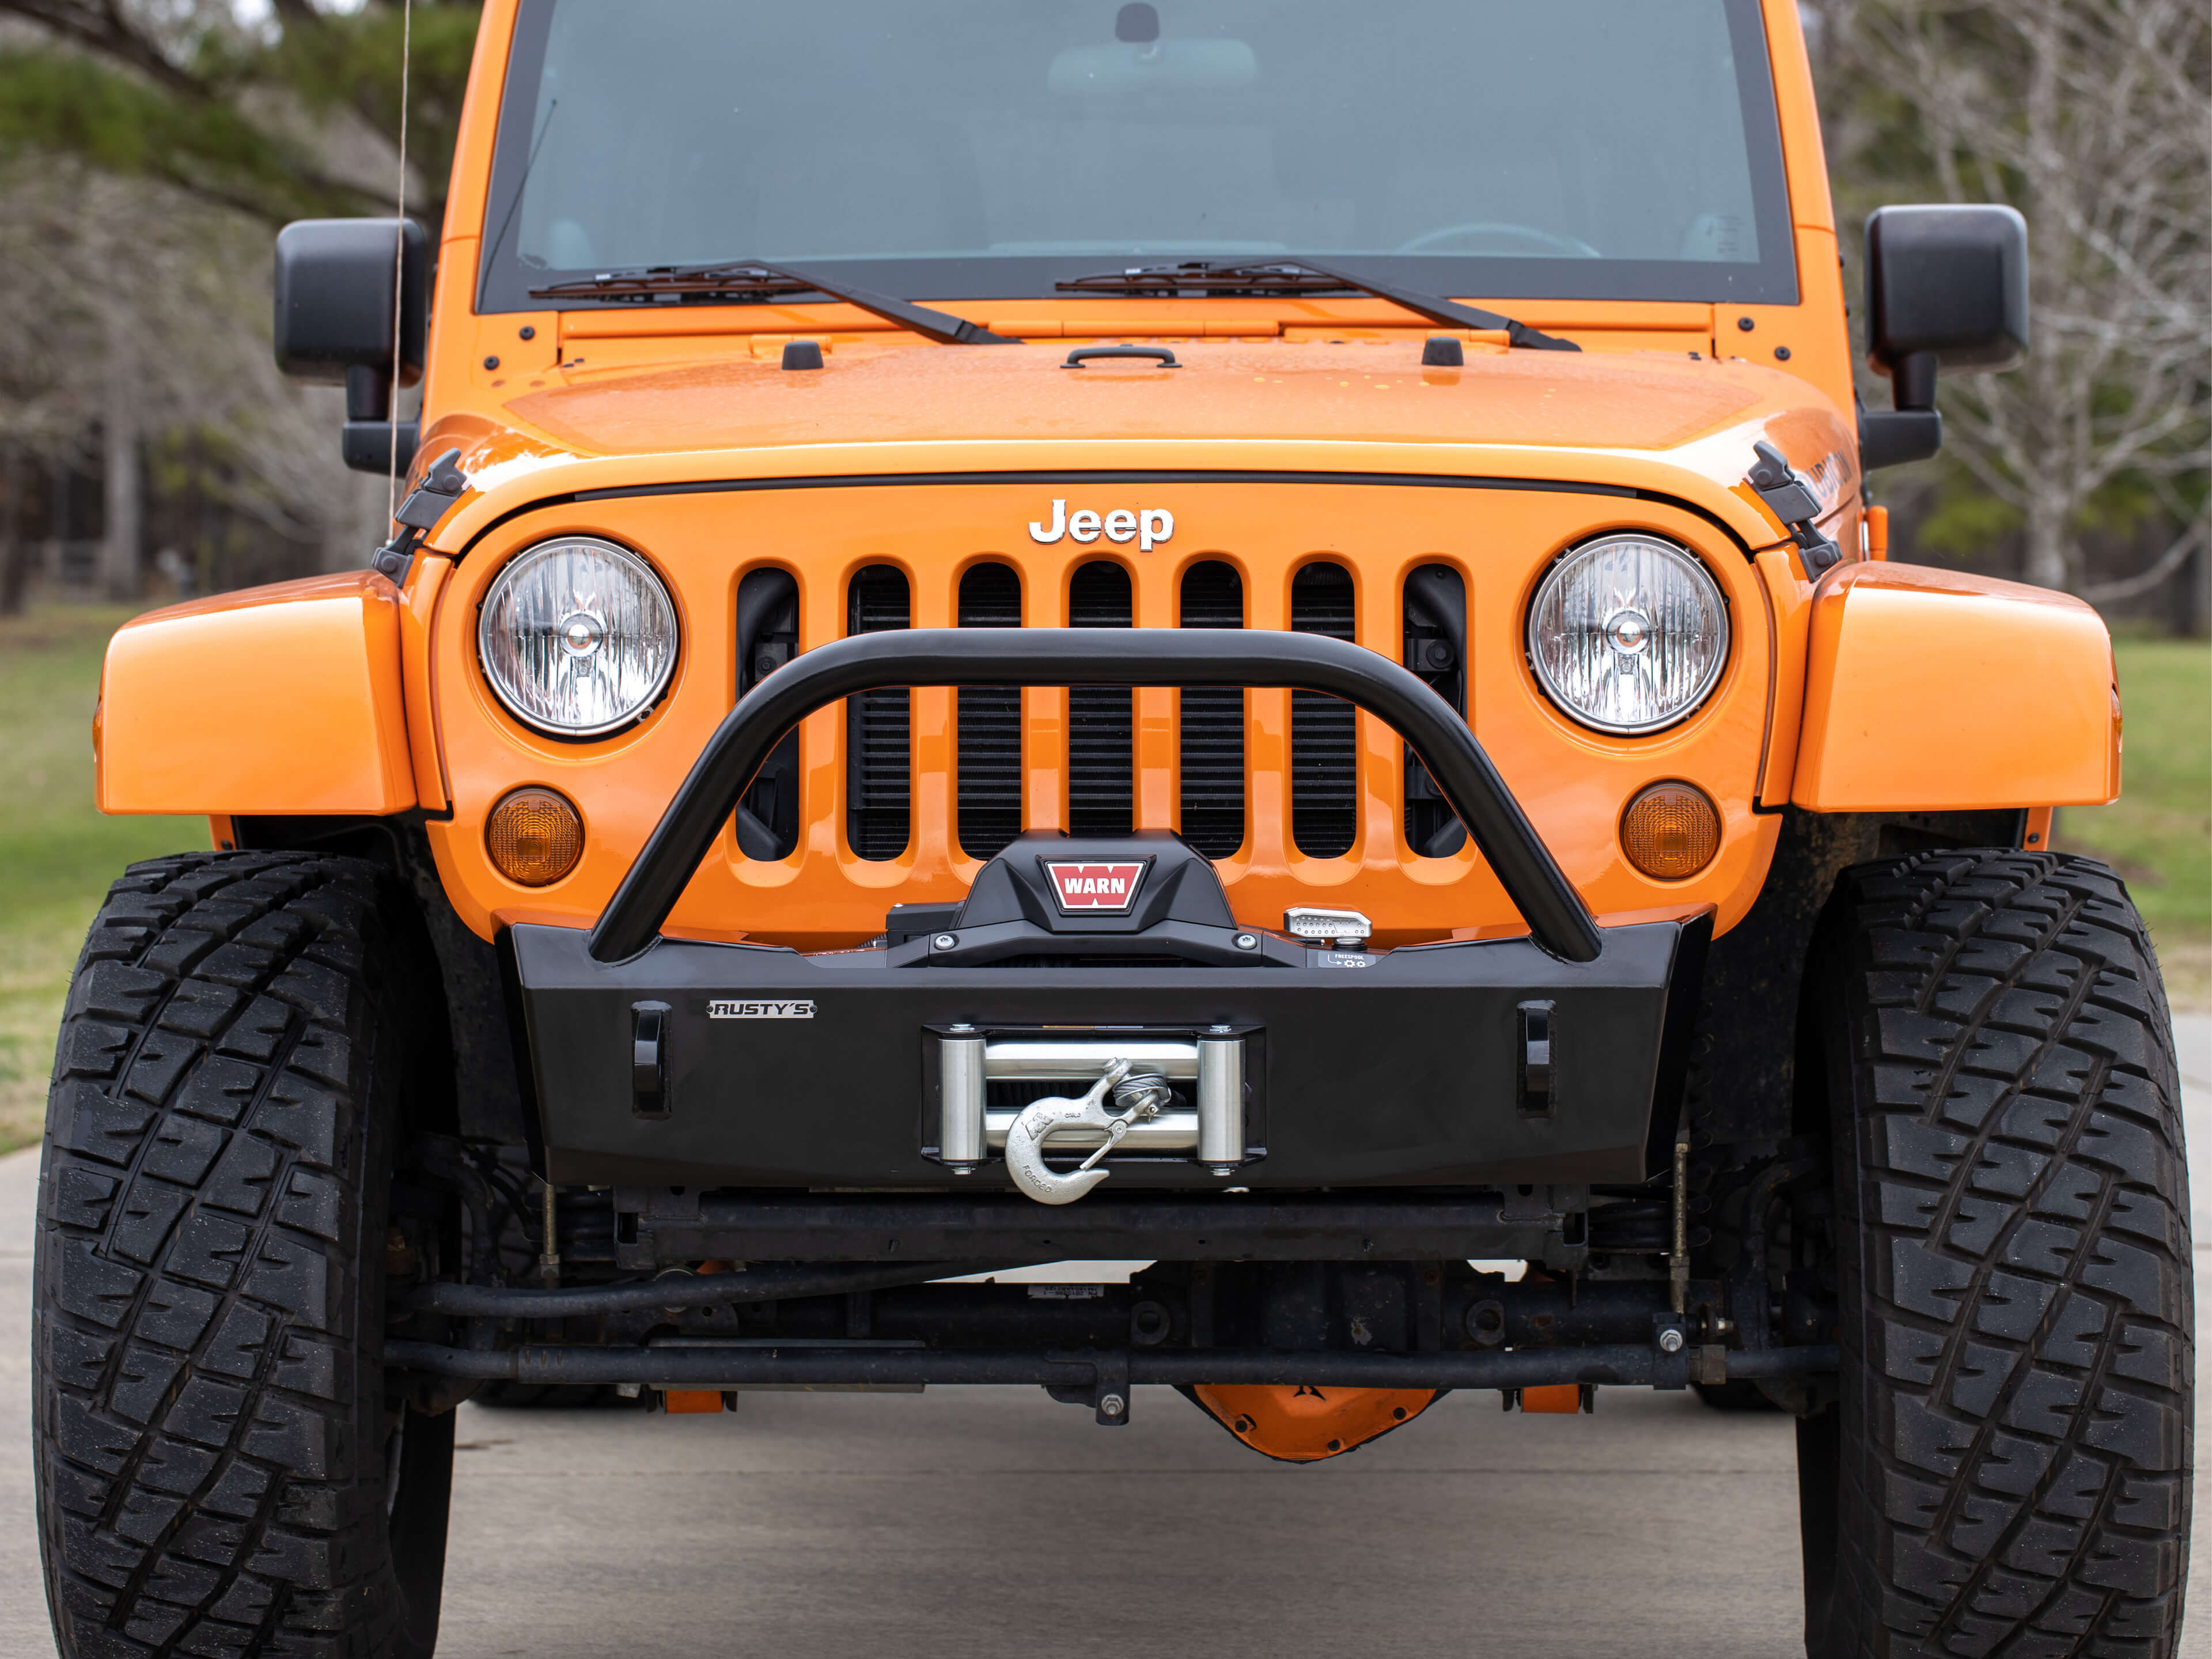 JK Wrangler & Rubicon ('07-'18) Bumpers, Tire Carriers, Winch Mounts & –  Rusty's Off-Road Products